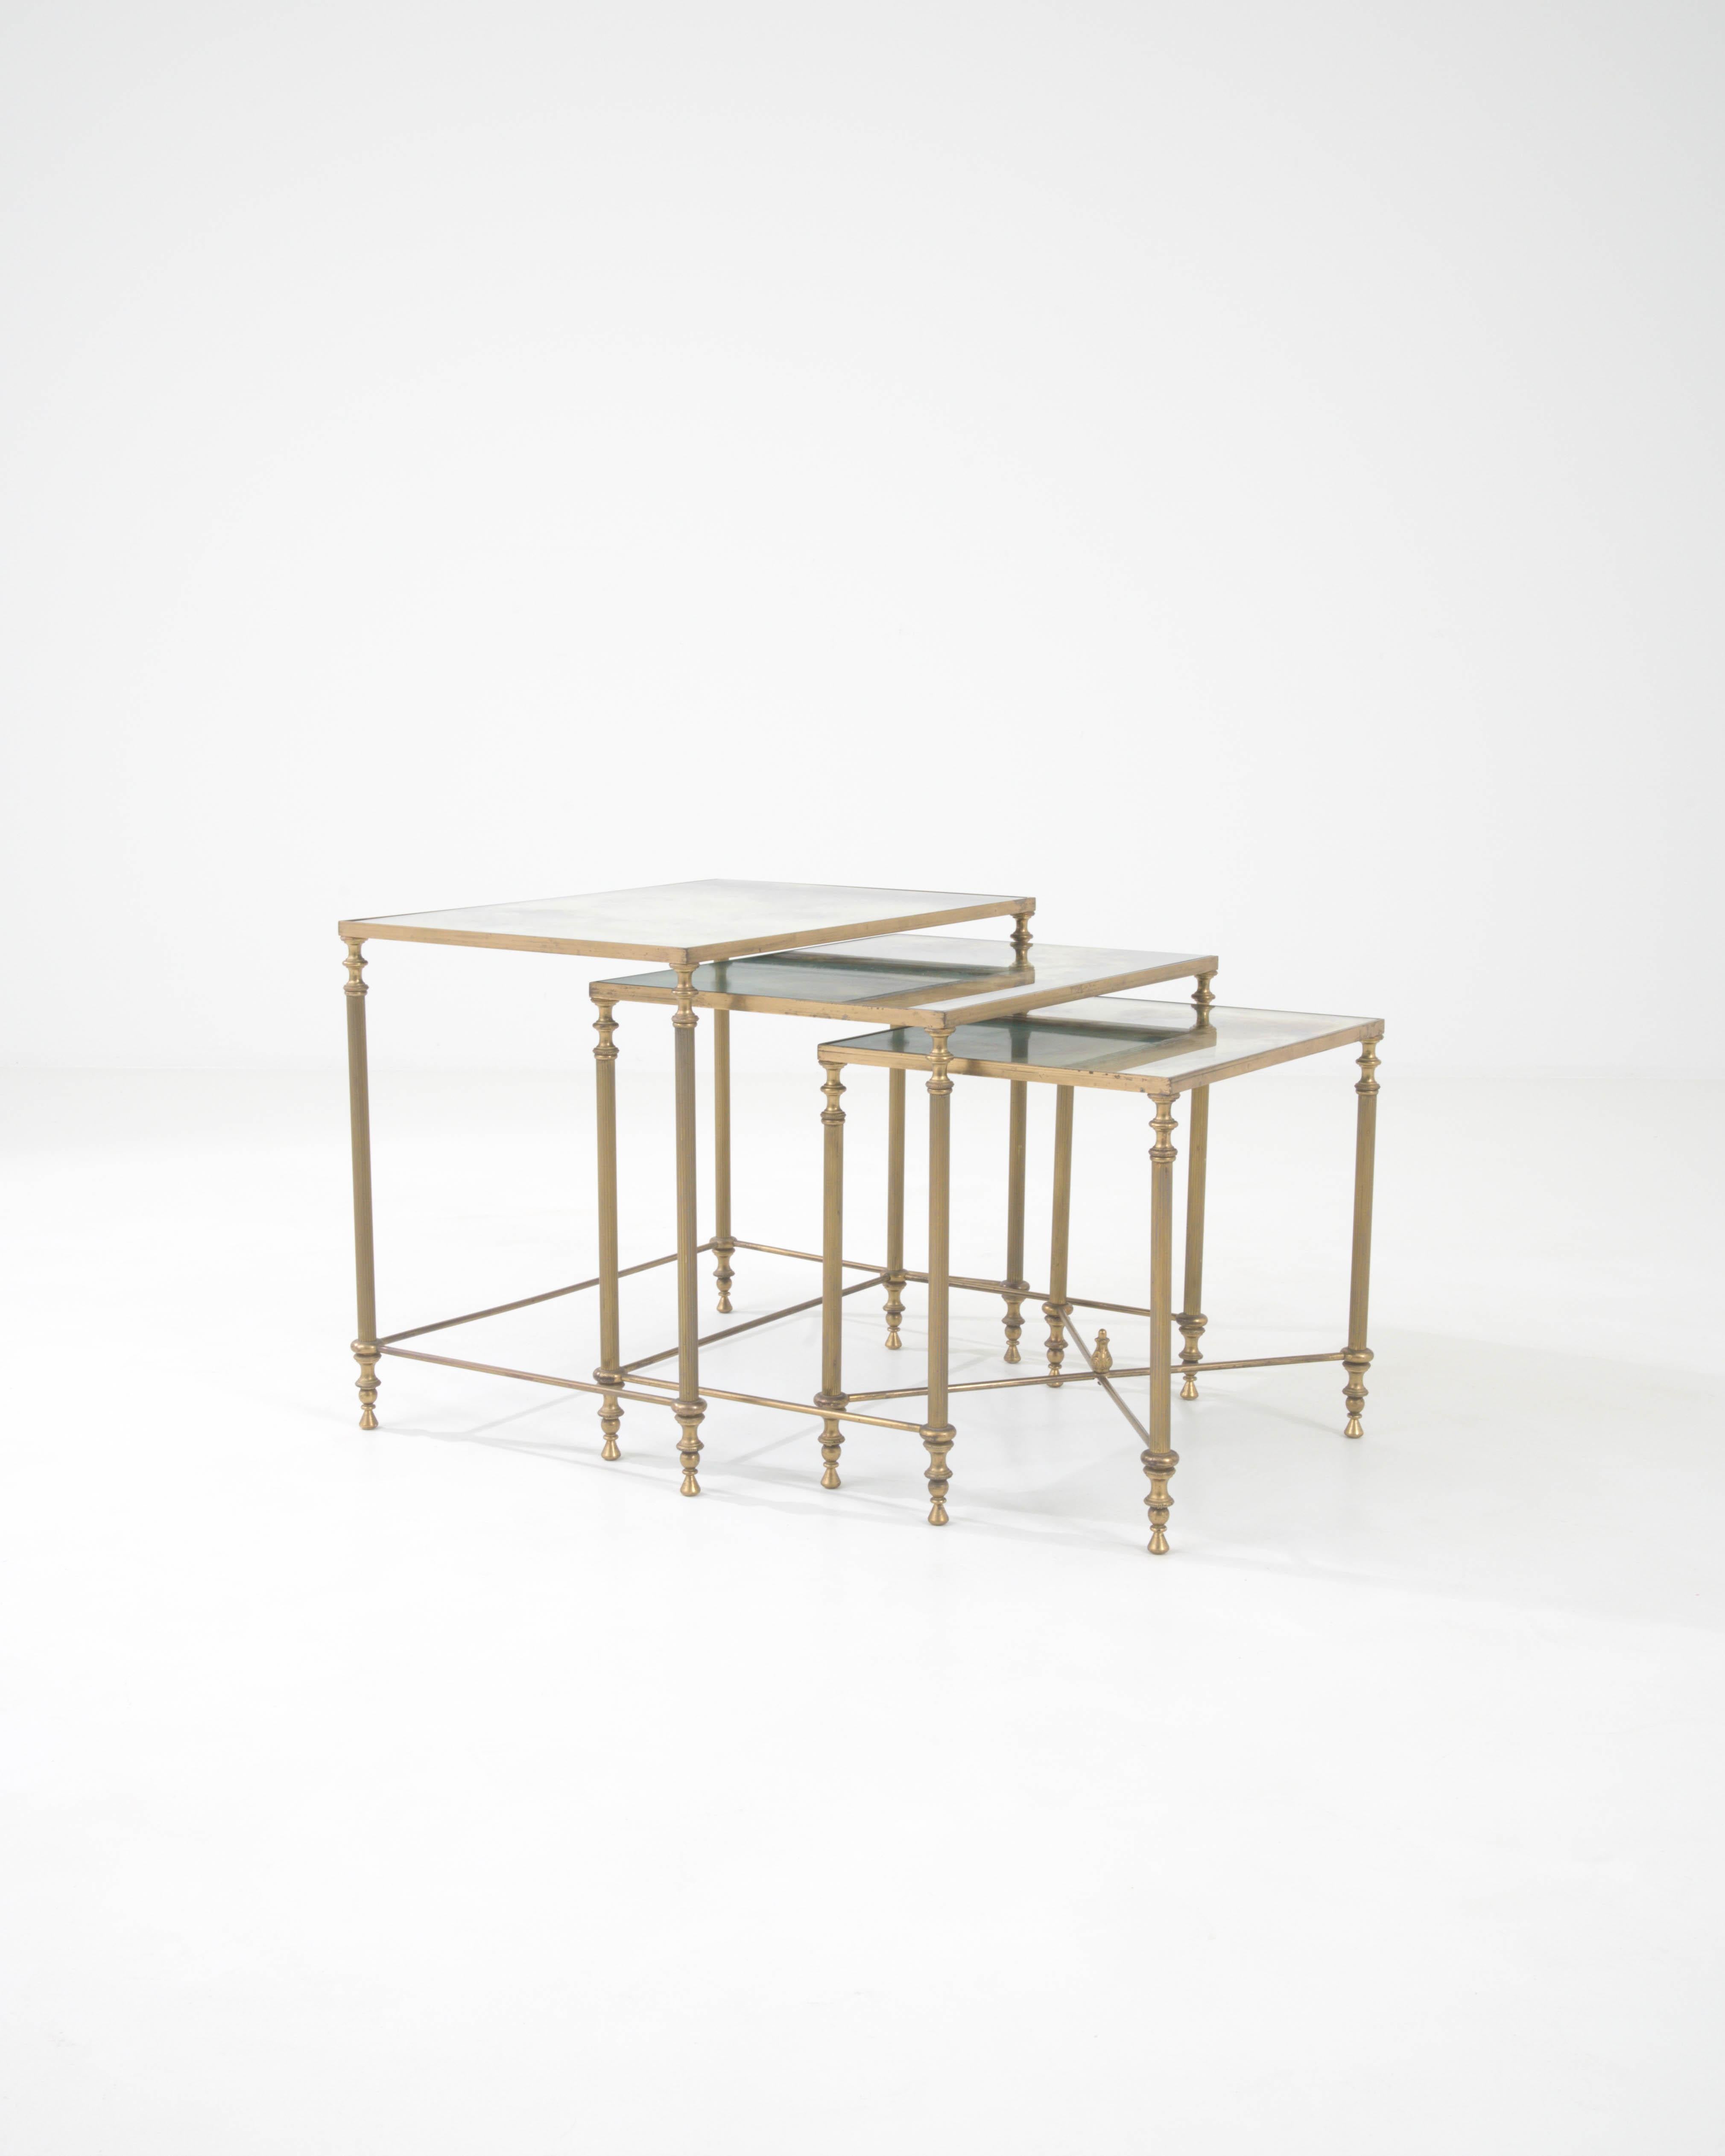 The graceful silhouette of this trio of vintage brass nesting tables makes an elegant impression. Built in France in the 20th century, a rectangular tabletop of tinted glass is clasped within a brass frame. Geometric facets decorate the columnar